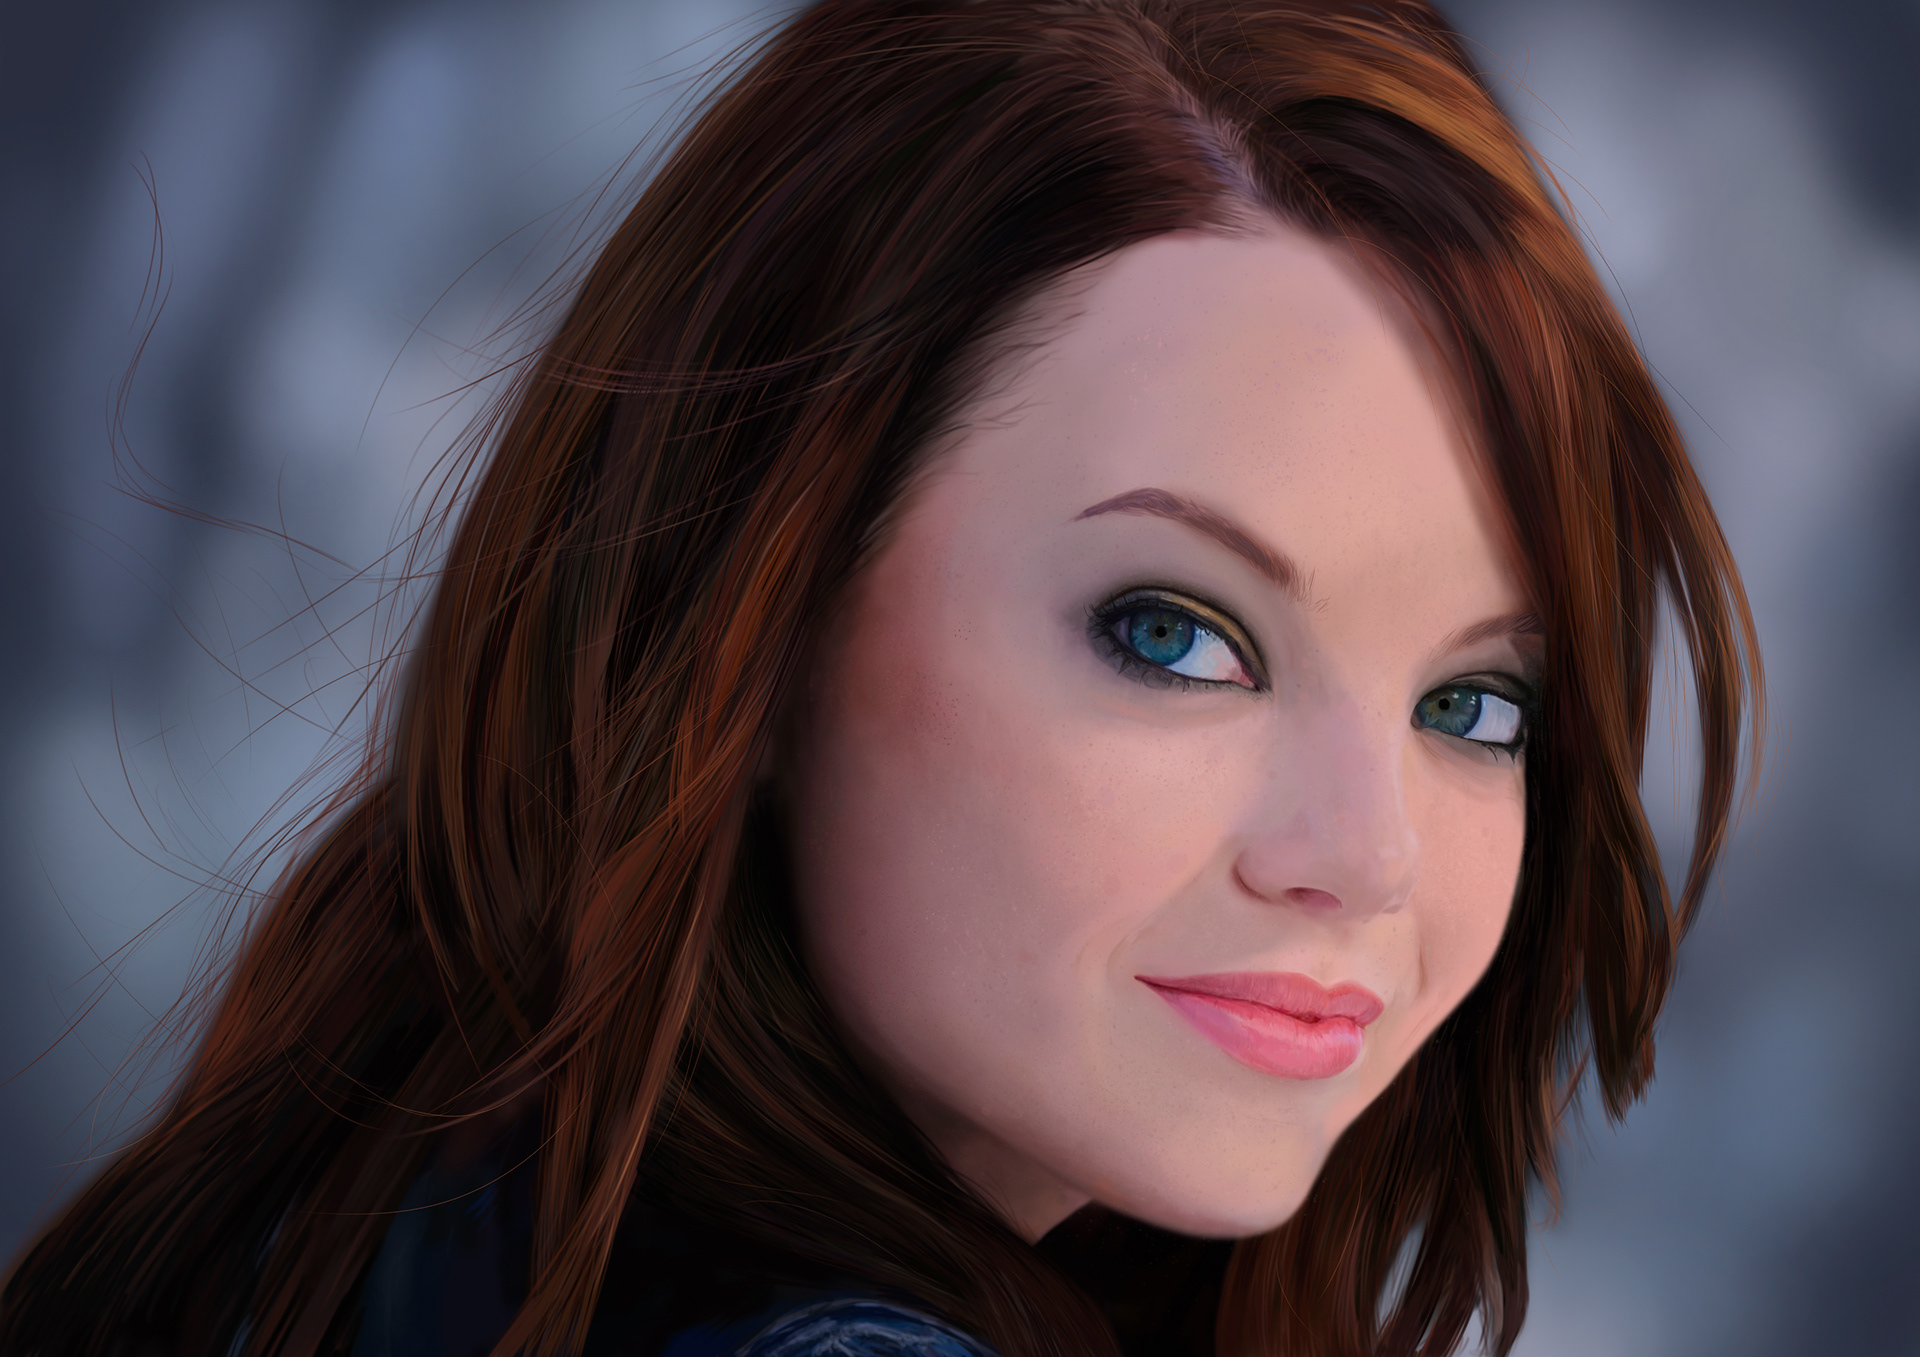 Photoshop speed painting speed painting portrait emma stone fast painting п...